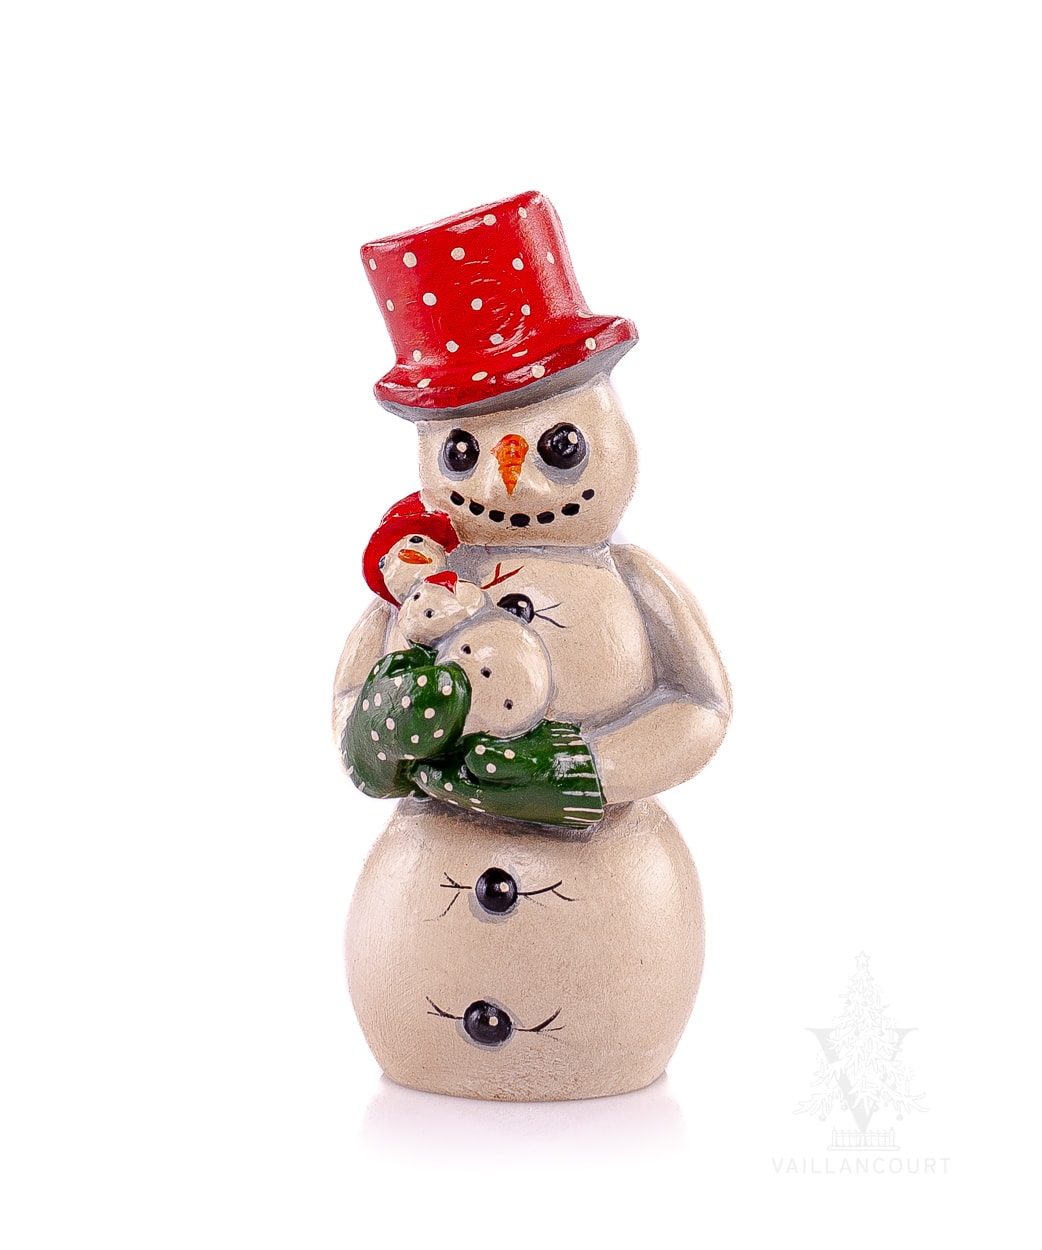 Red Hat Snowman Holding Snow Baby